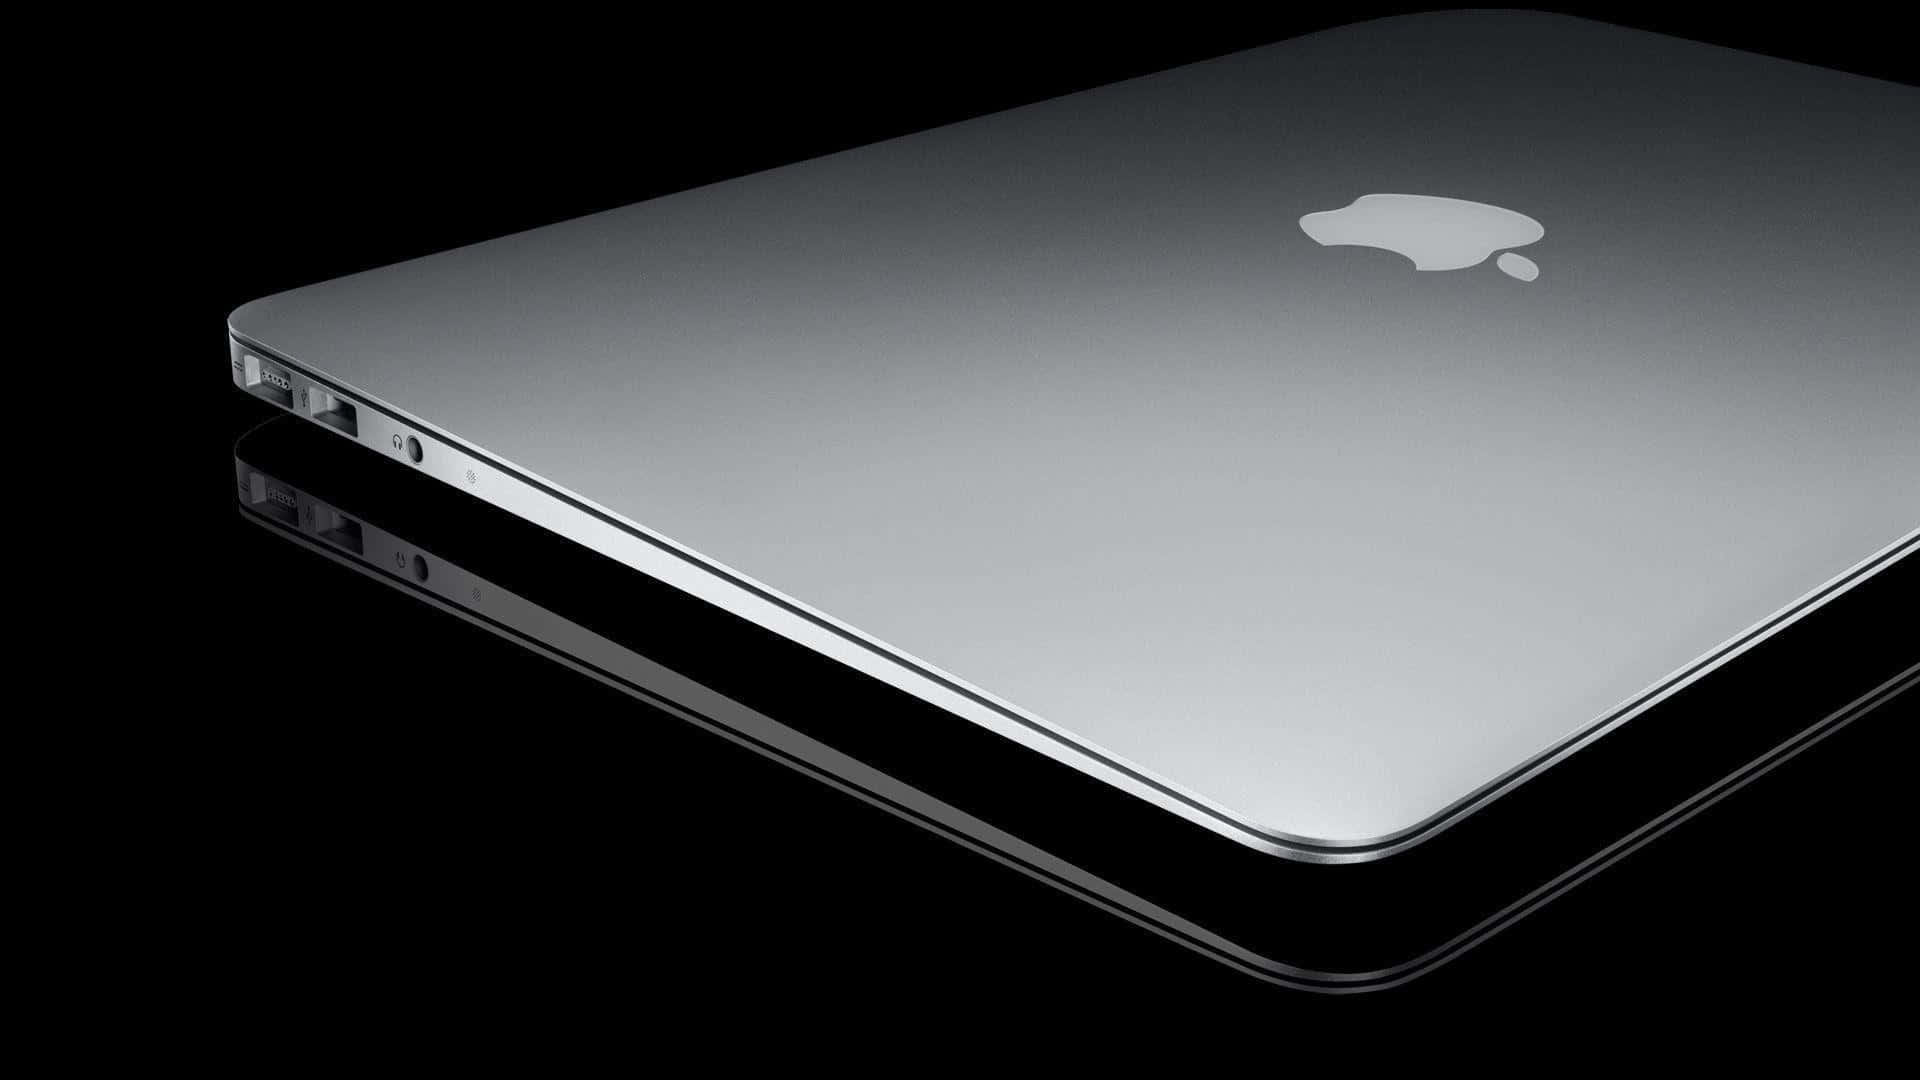 A Silver Macbook Pro Is Shown On A Black Surface Wallpaper